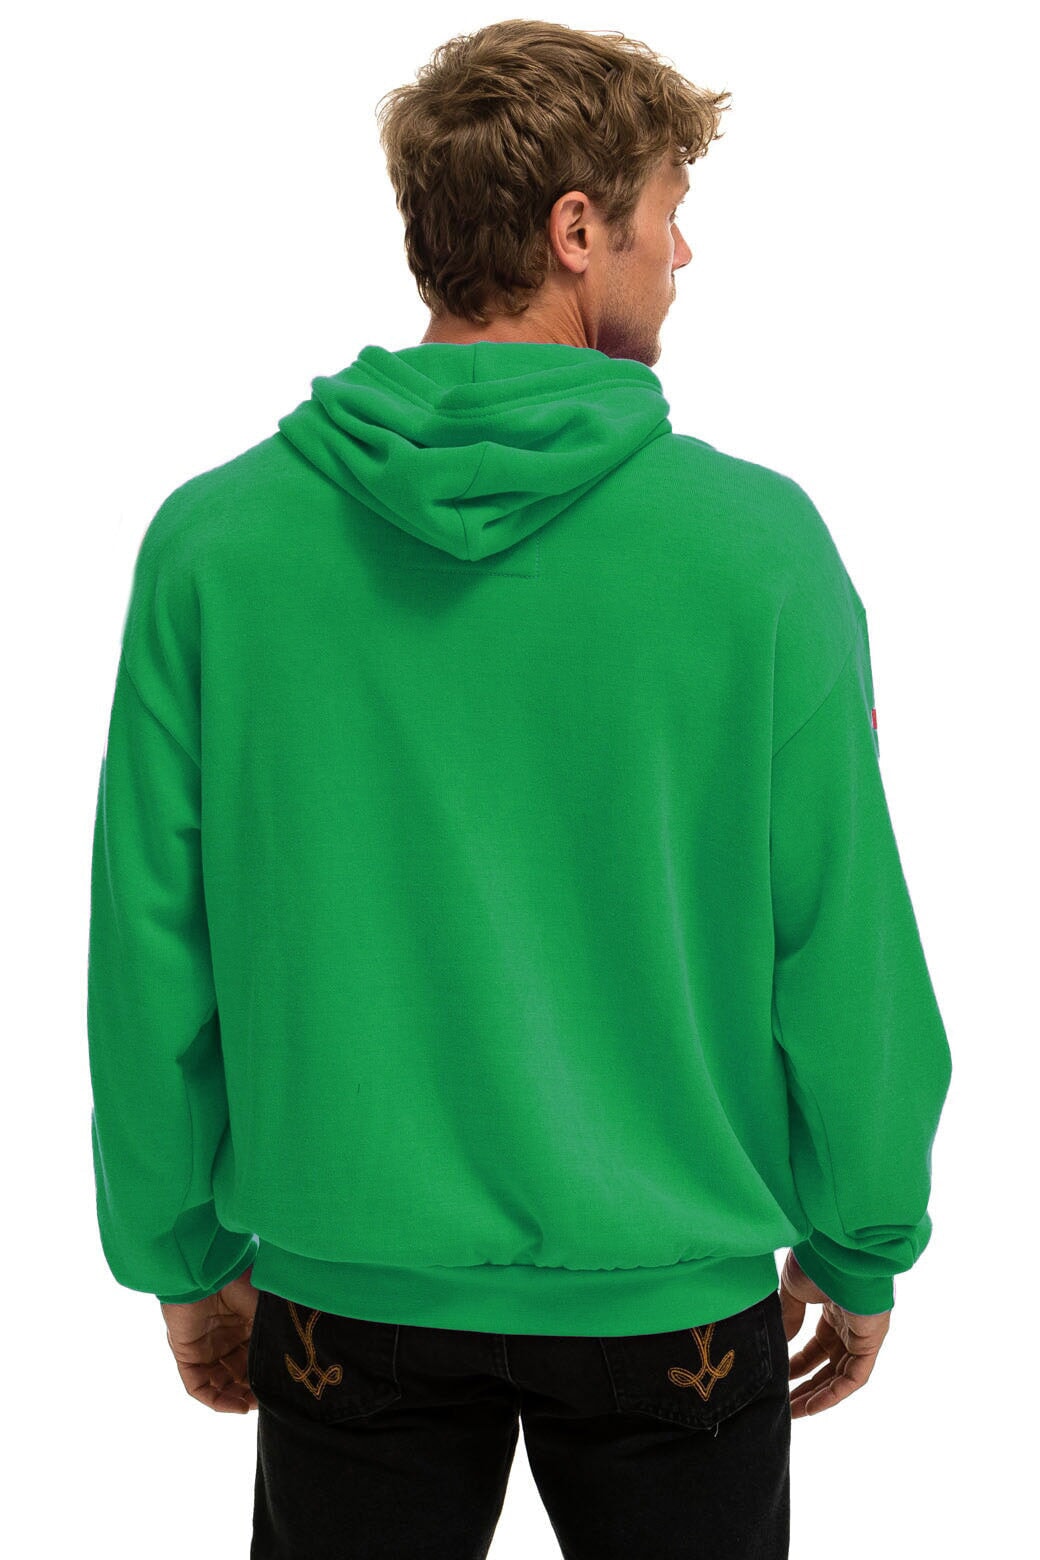 AVIATOR NATION HAMPTONS RELAXED PULLOVER HOODIE - KELLY GREEN Hoodie Aviator Nation 